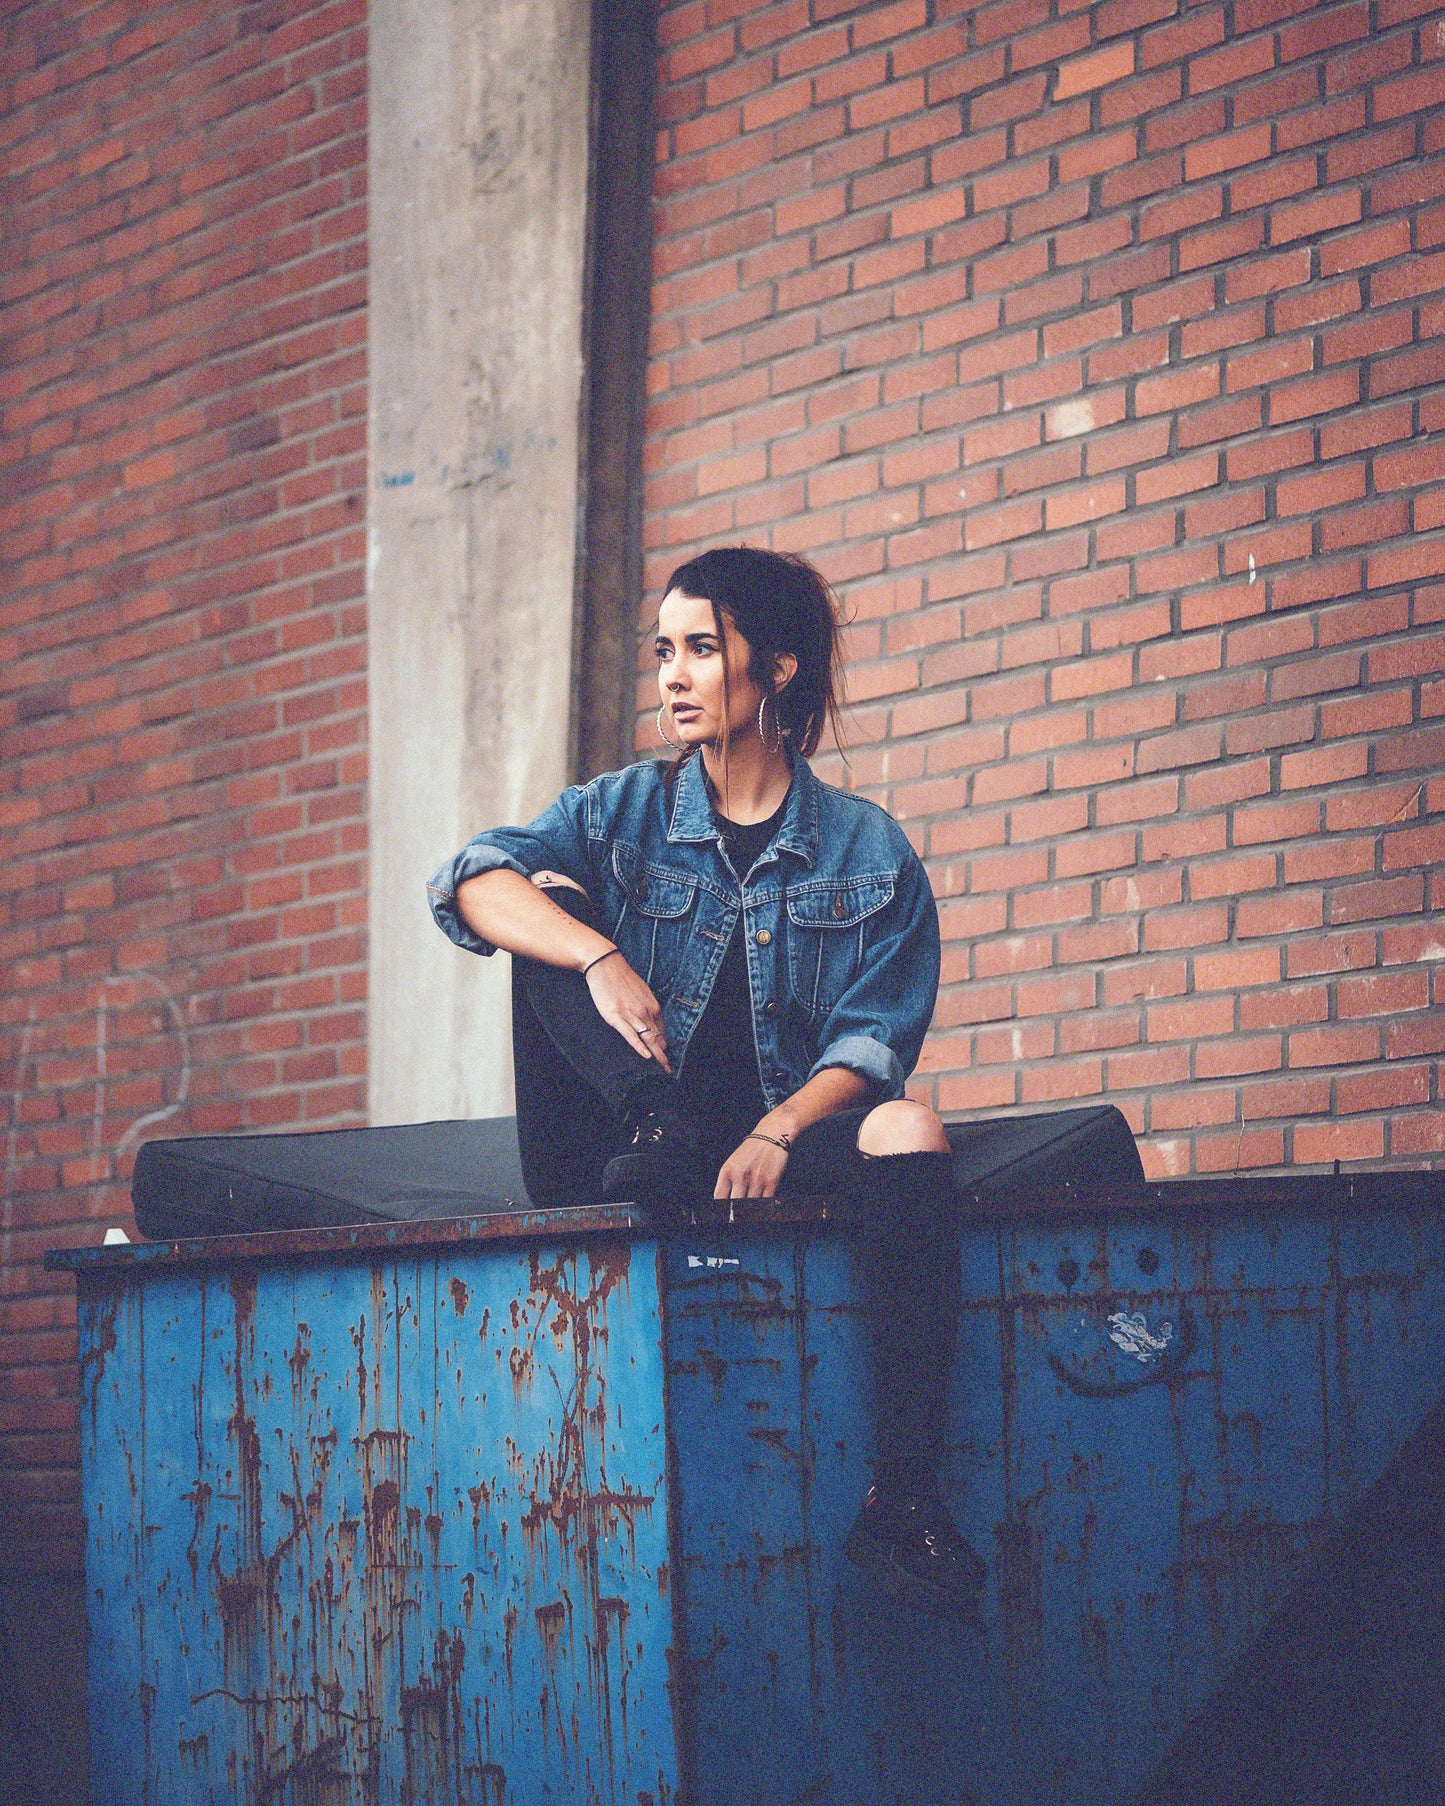 Young-woman-sitting-on-metal-container-wearing-vintage-jeans-jacket-grunge-style